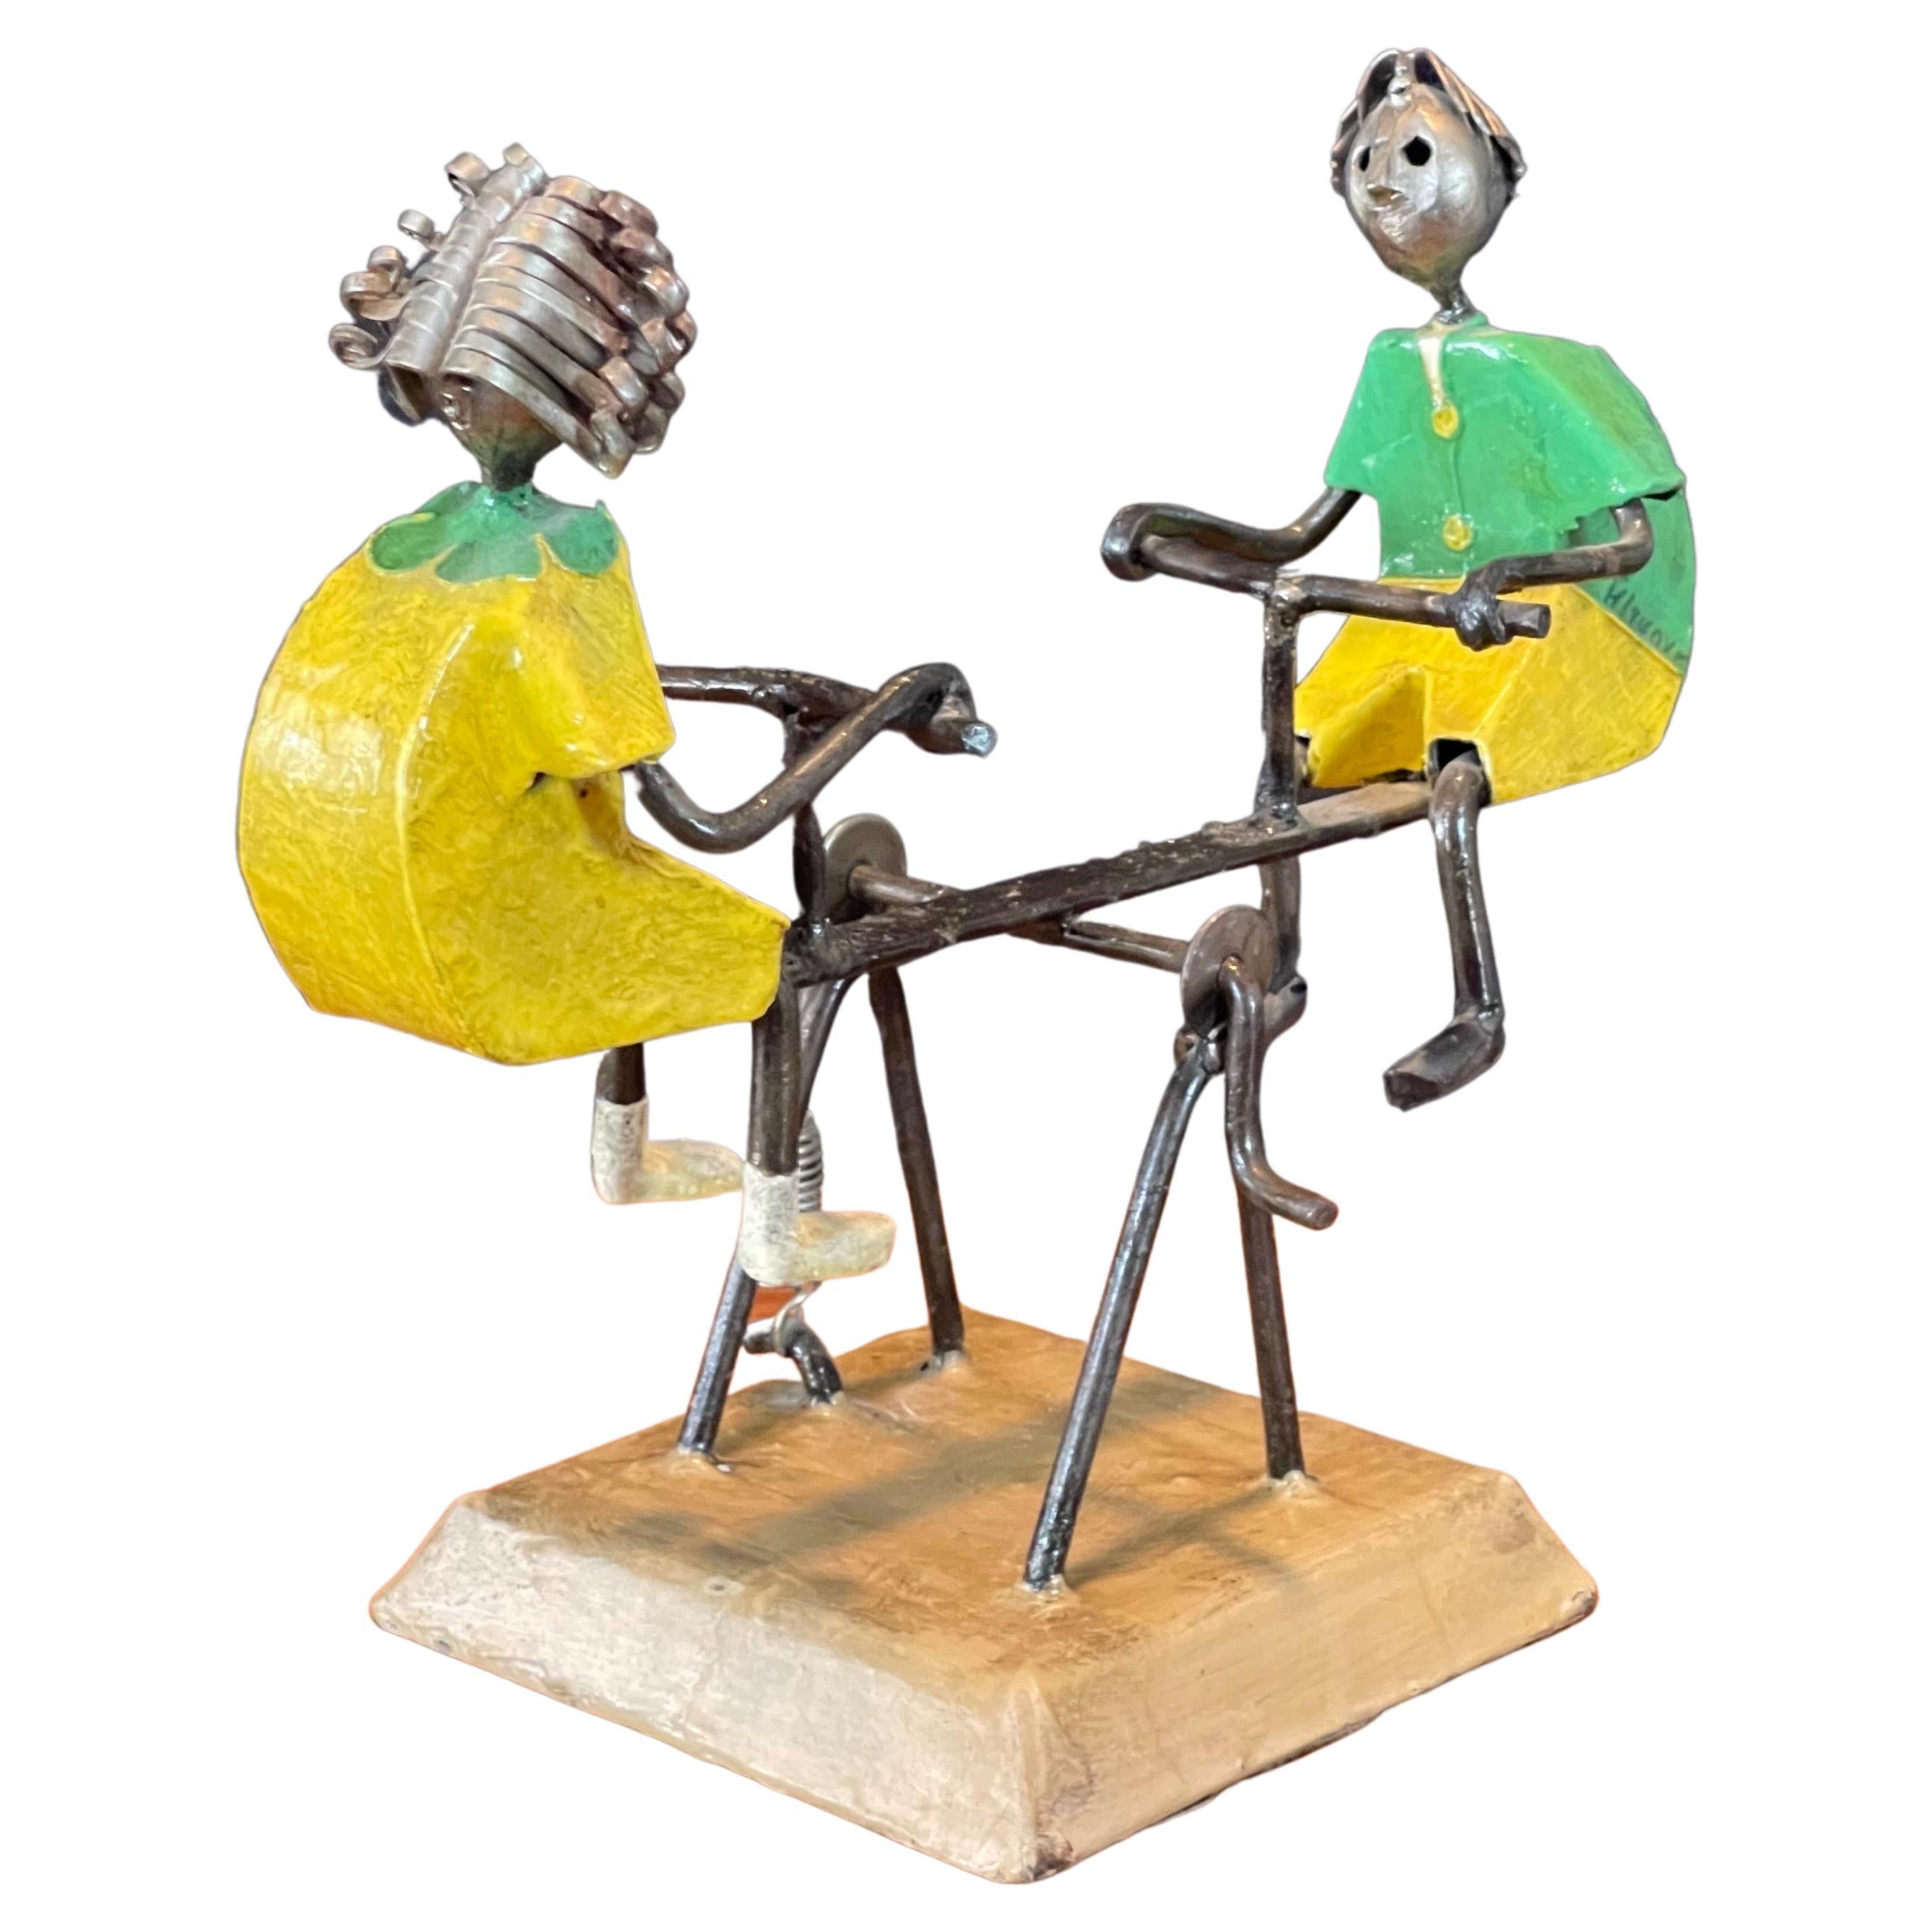 Eclectic hand painted metal see saw or teeter totter sculpture by listed Mexican artist Manuel Felguerez, circa 1970s  The sculpture has a small handle and spring mechanism that allows it to 